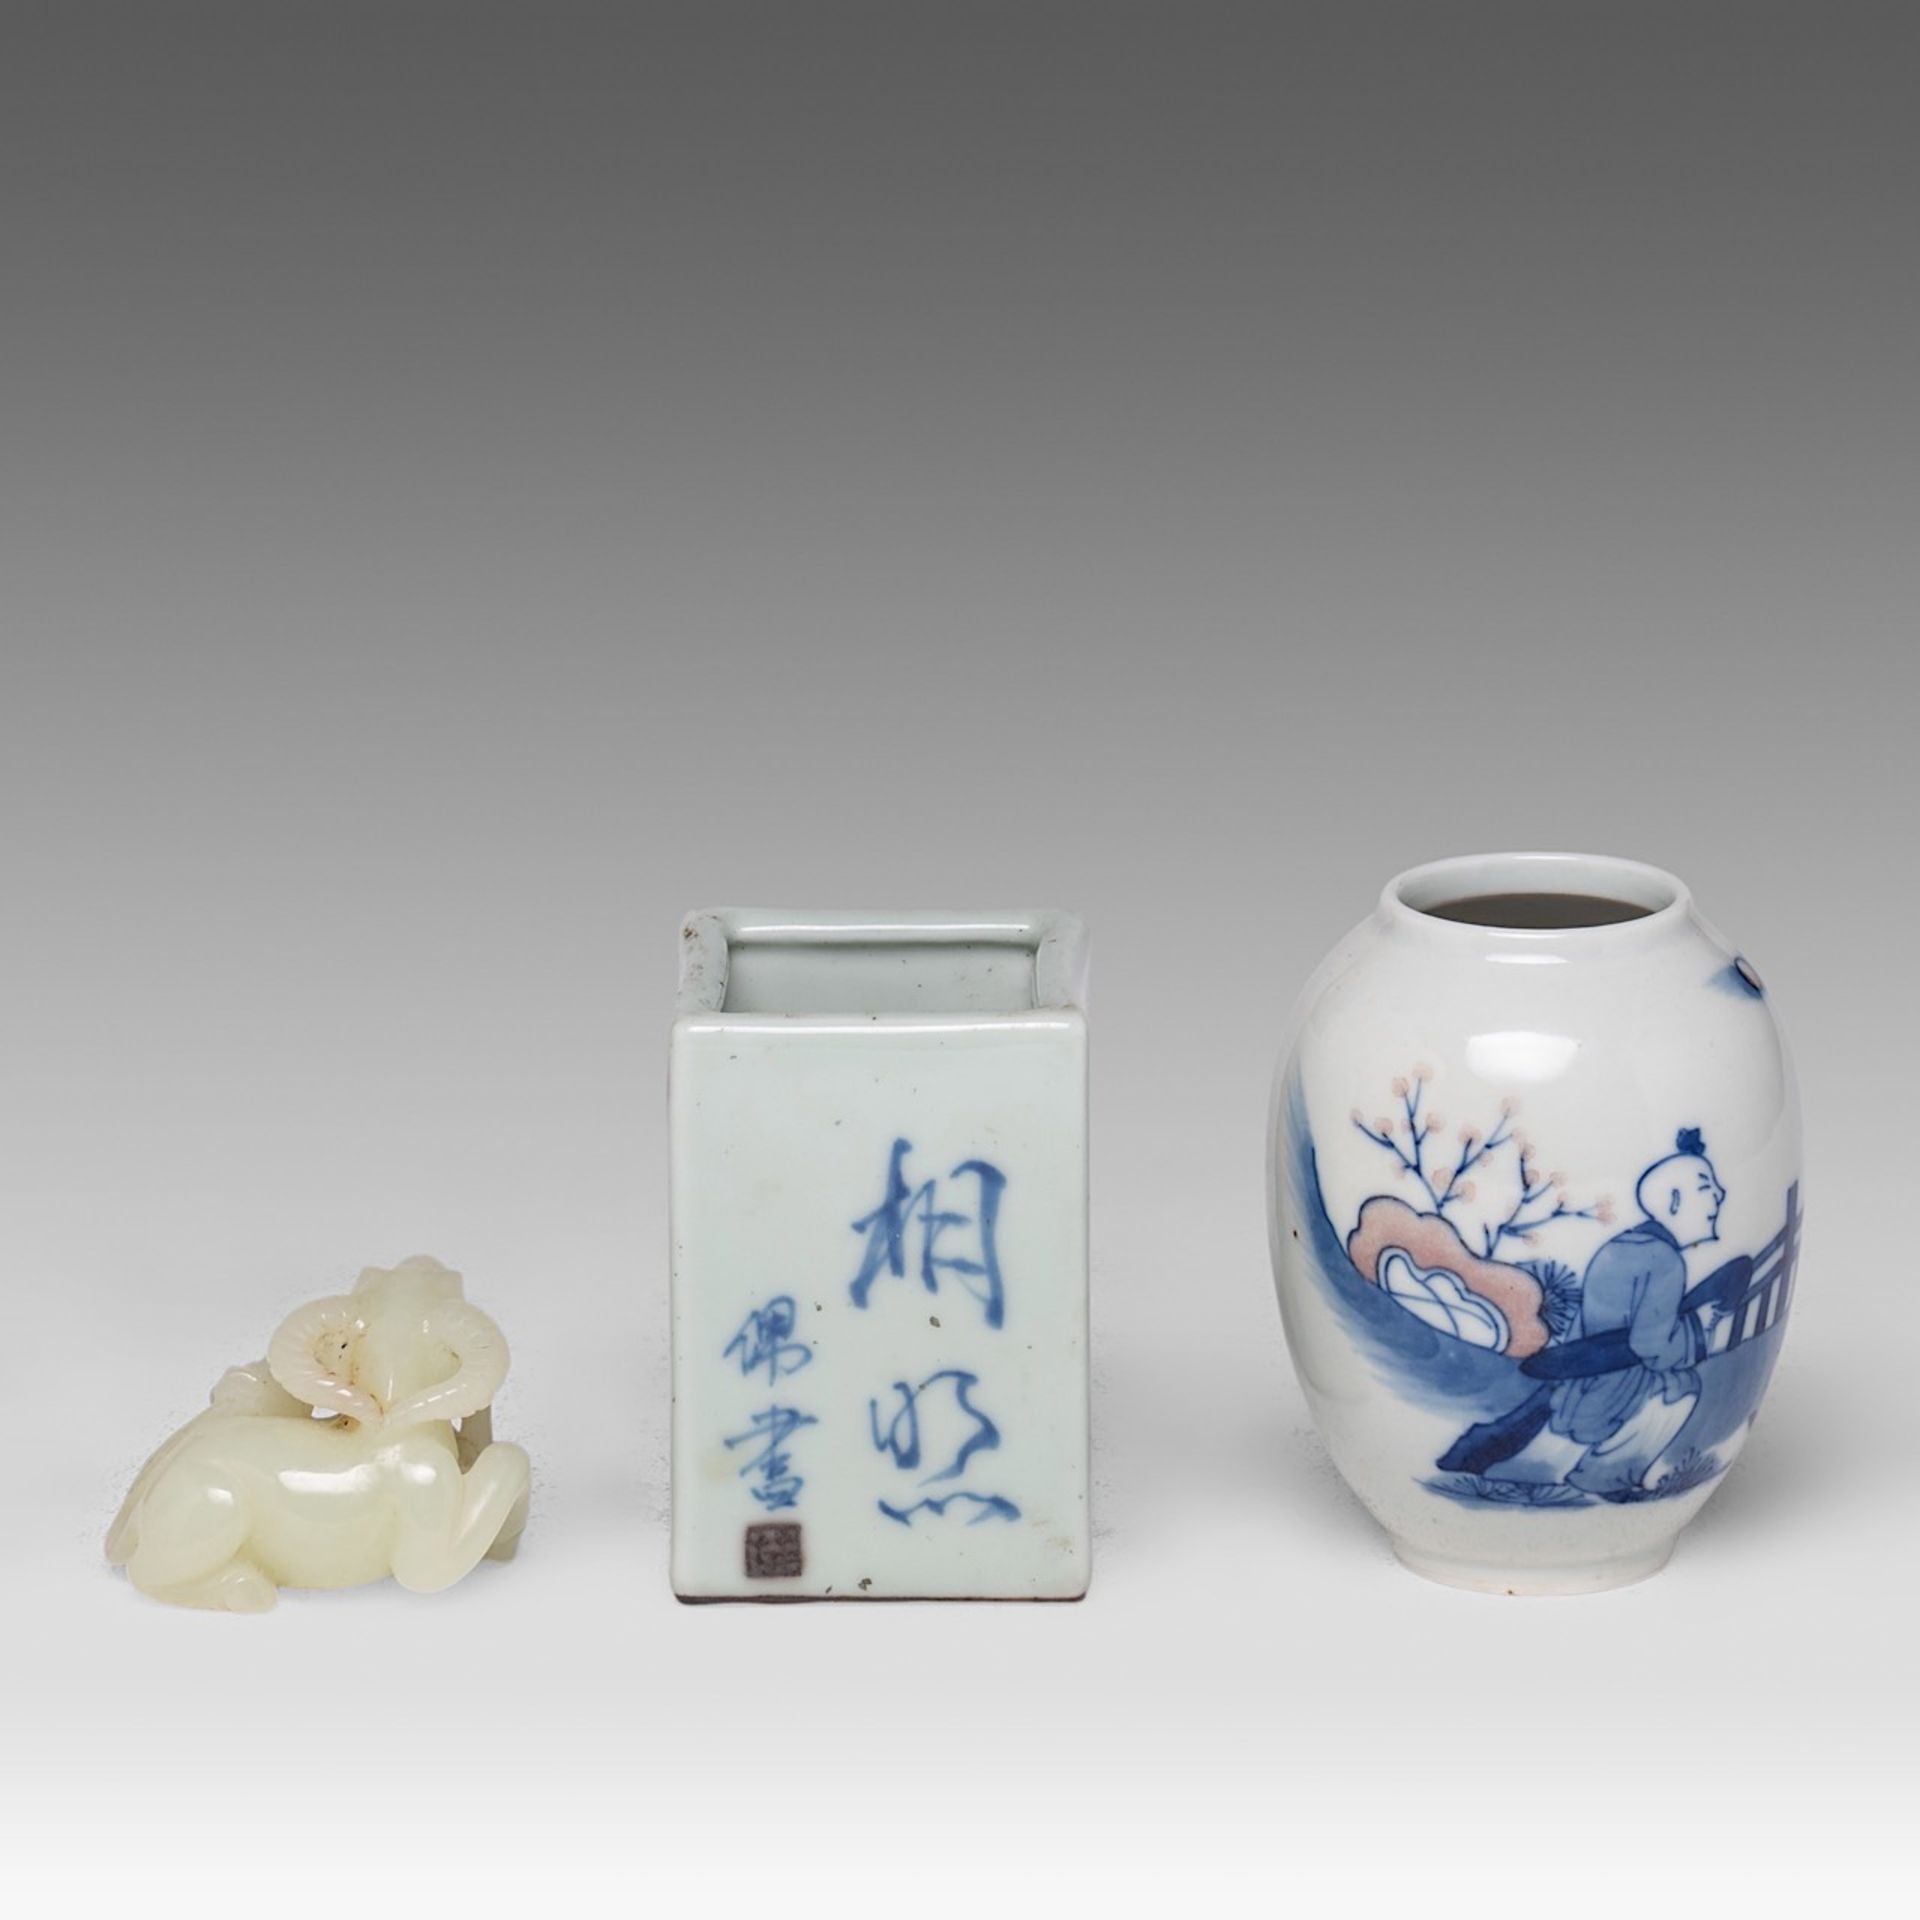 A collection of four Chinese scholar's objects, incl. a brush pot with inscriptions, late 18thC - ad - Bild 4 aus 29